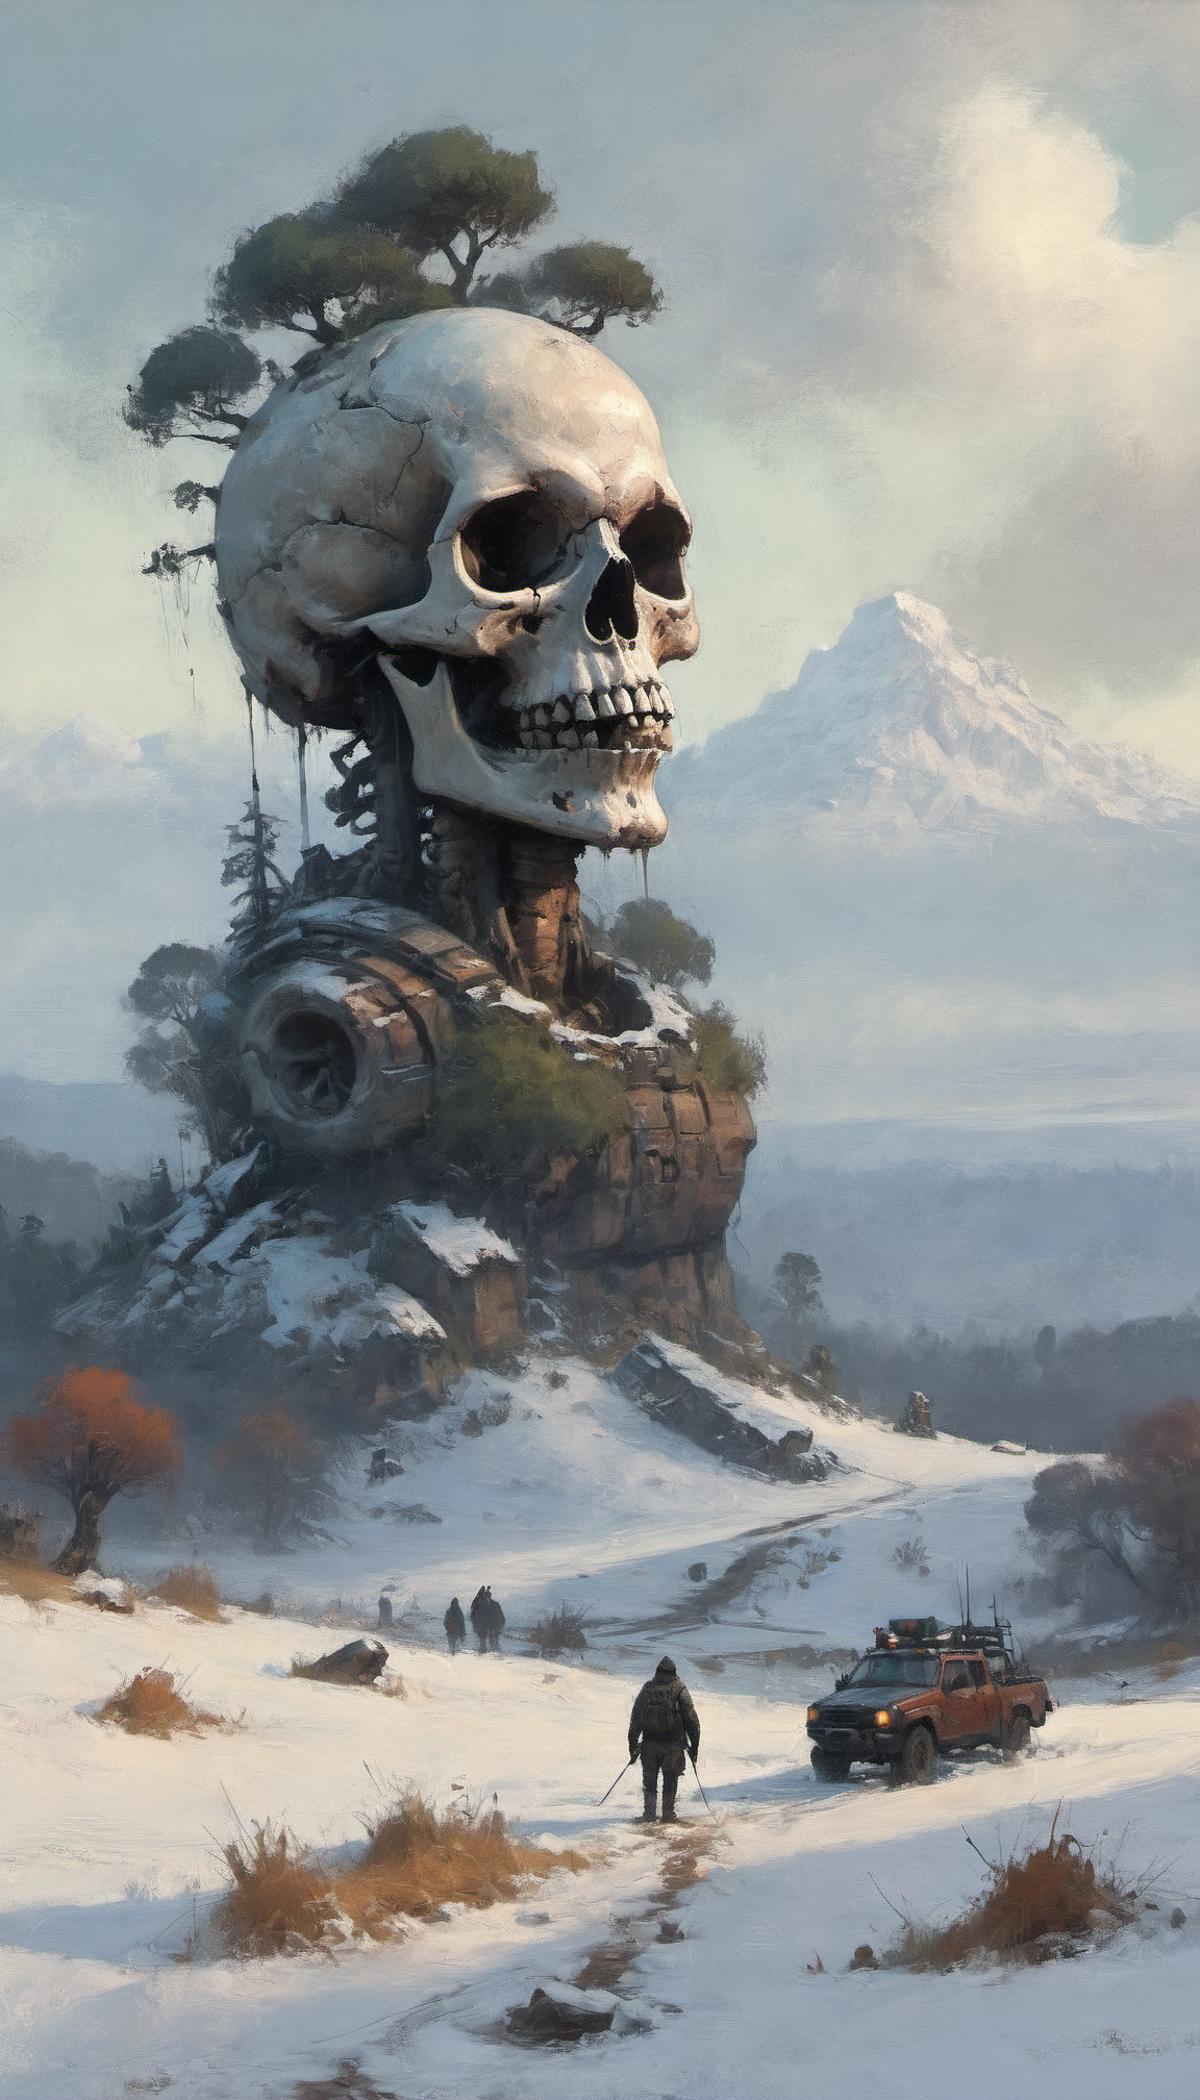 A painting of a skeleton head on a snowy mountain with a large wheel below it.